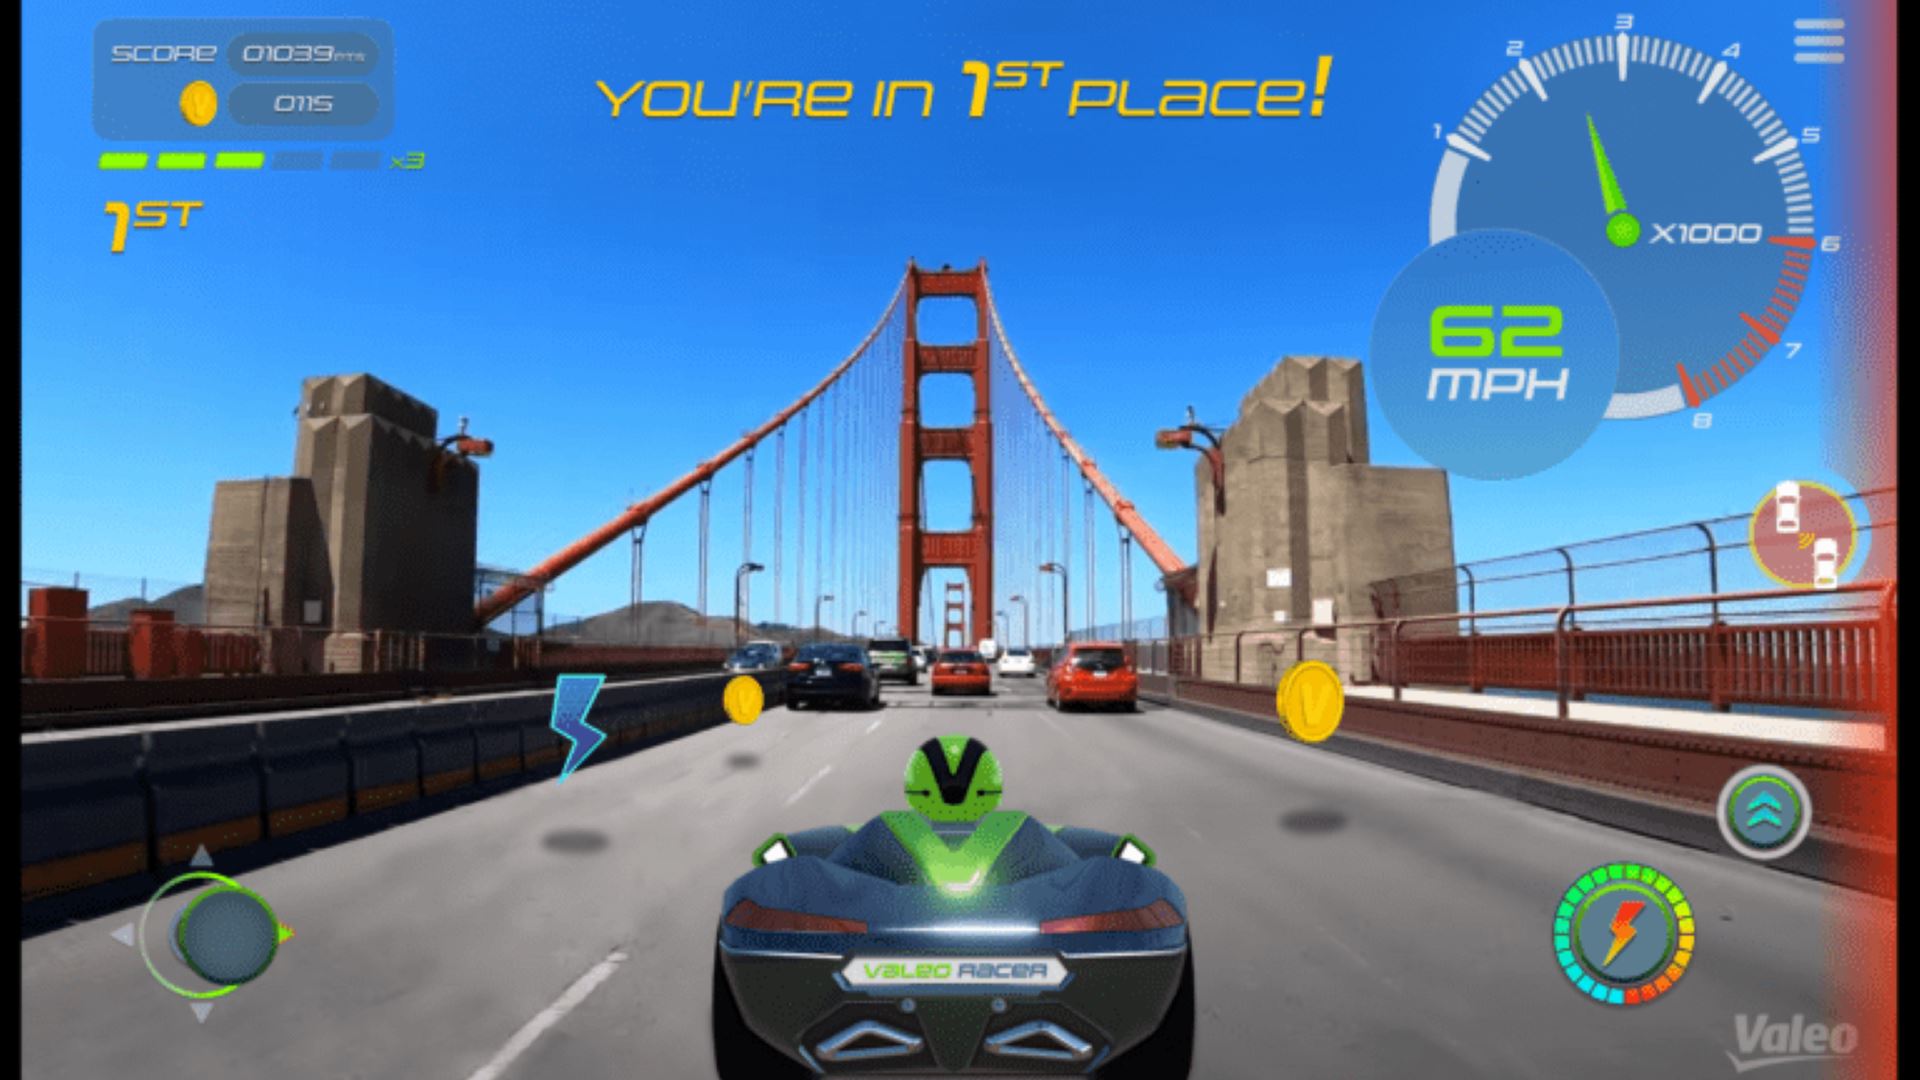 Valeo Presents new Extended Reality In car Gaming Experience Developed With Unity